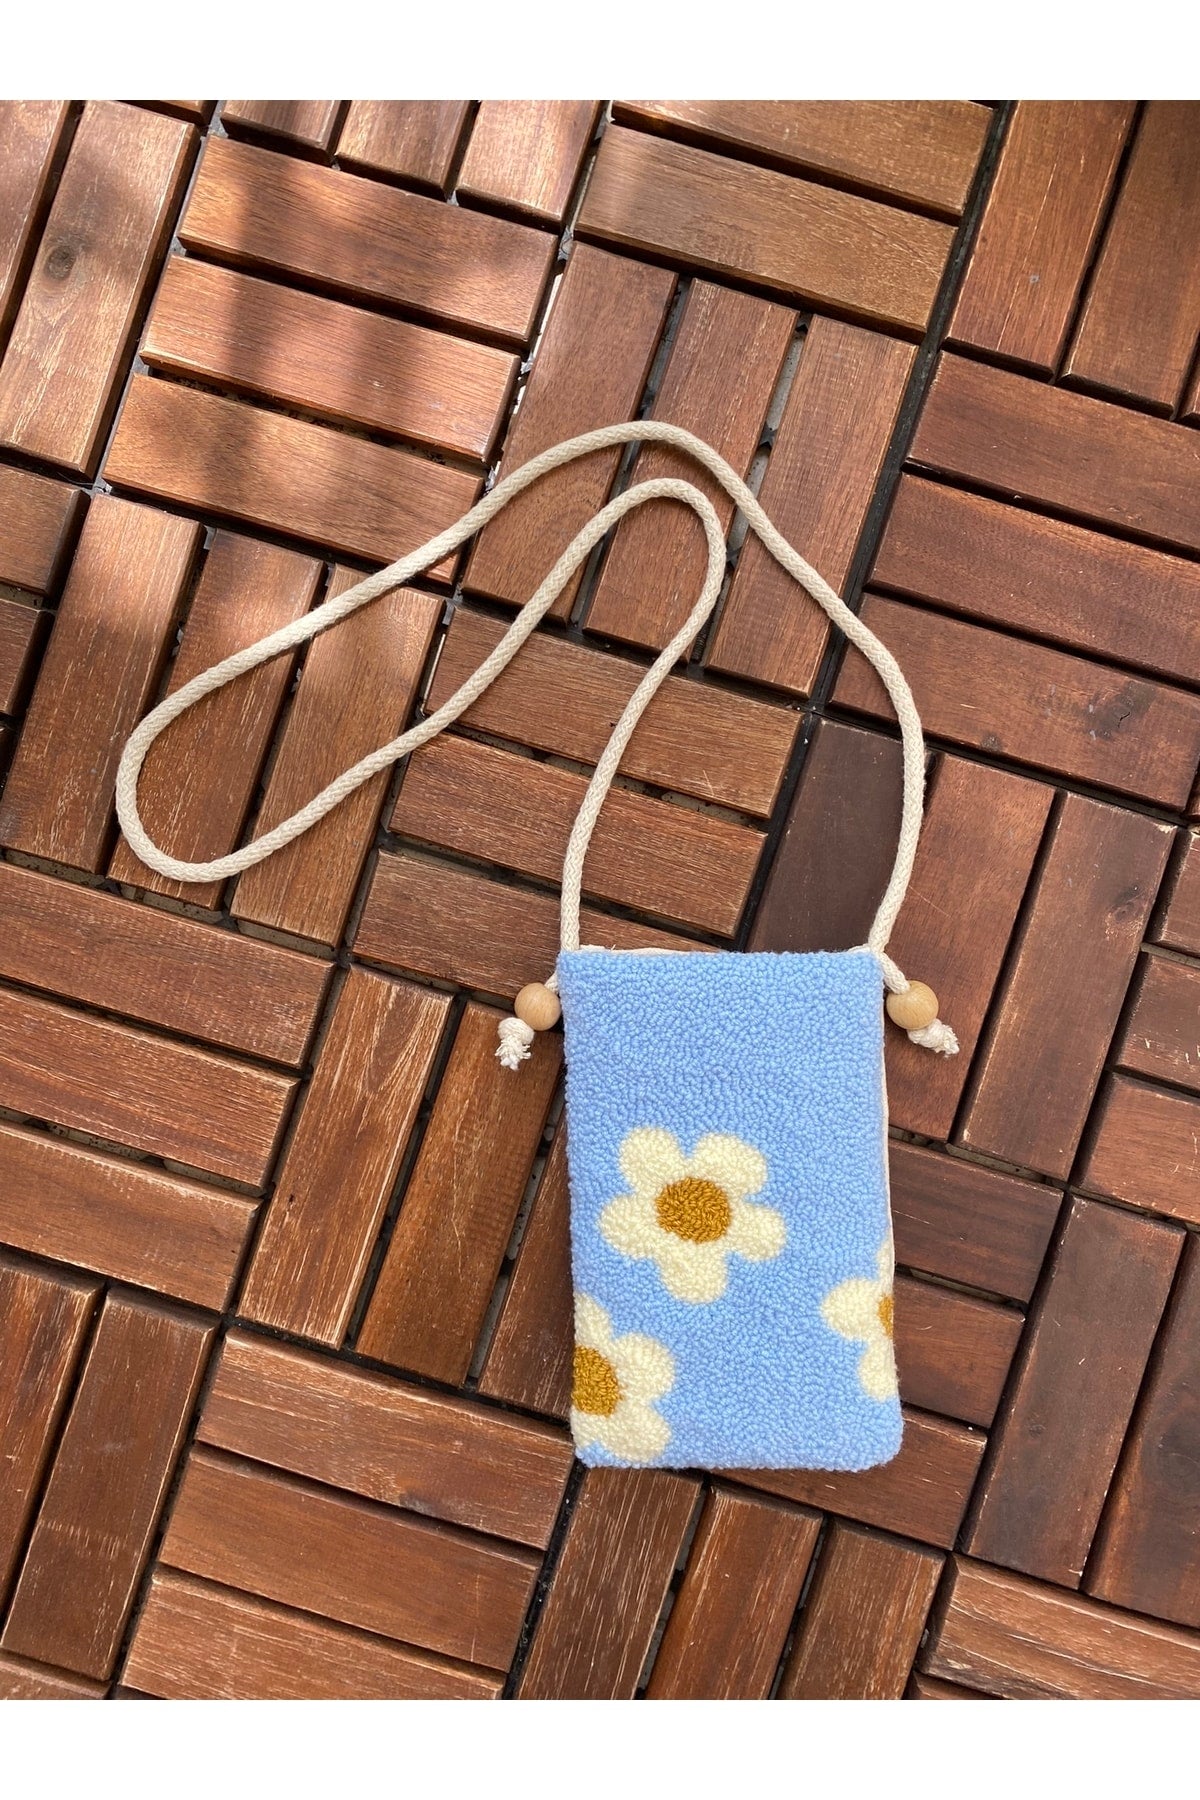 Punch Embroidery Phone Bag - Daisy Patterned Blue